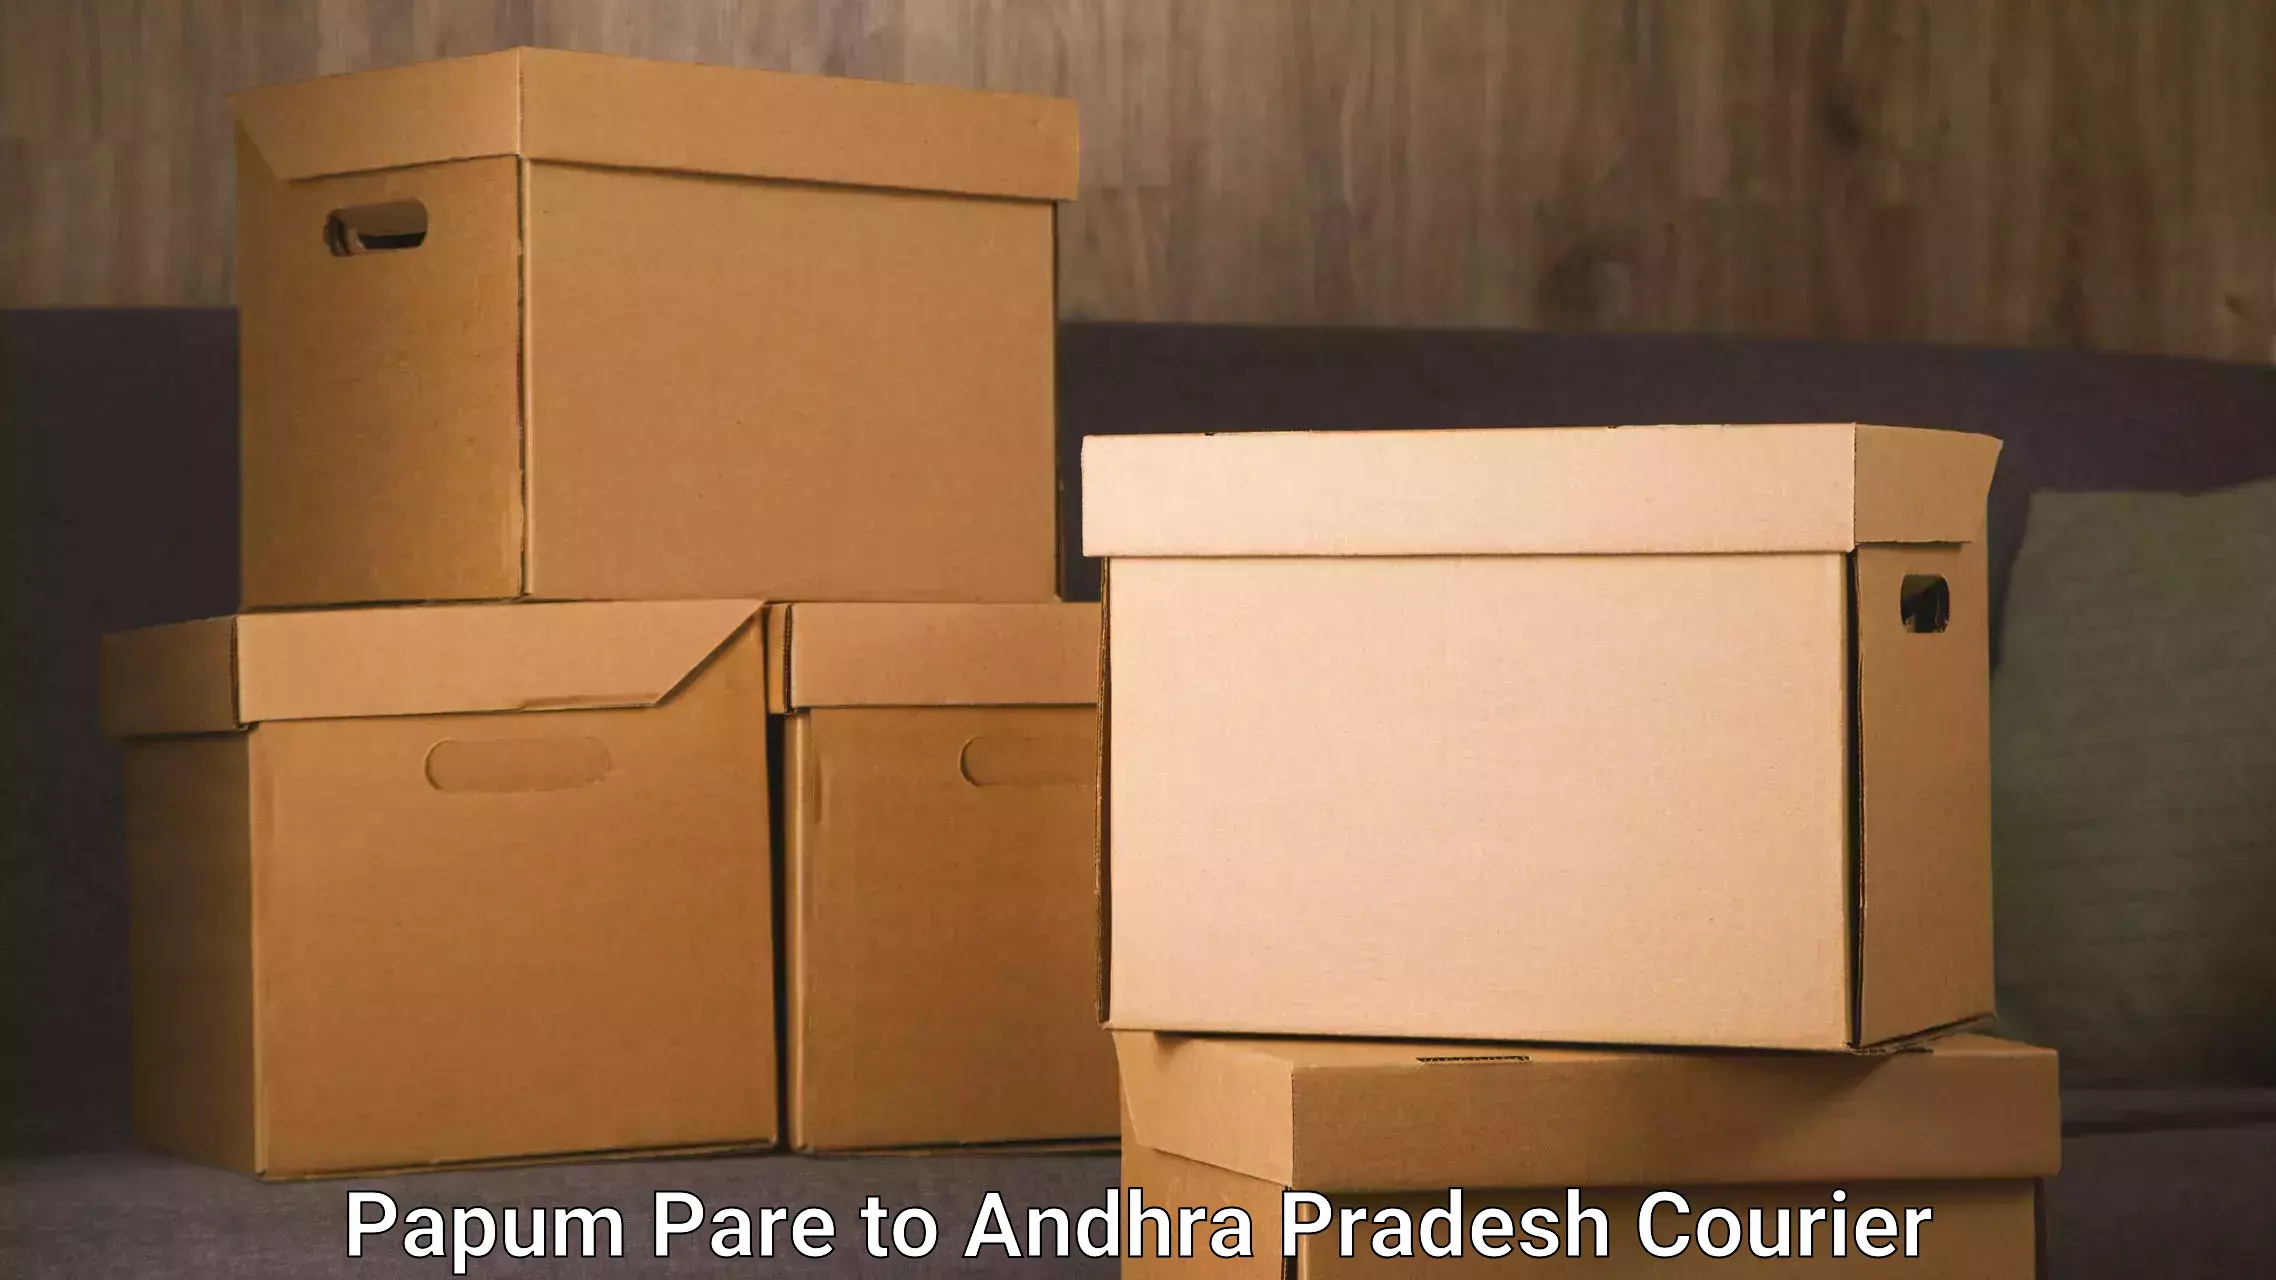 State-of-the-art courier technology Papum Pare to Ravulapalem